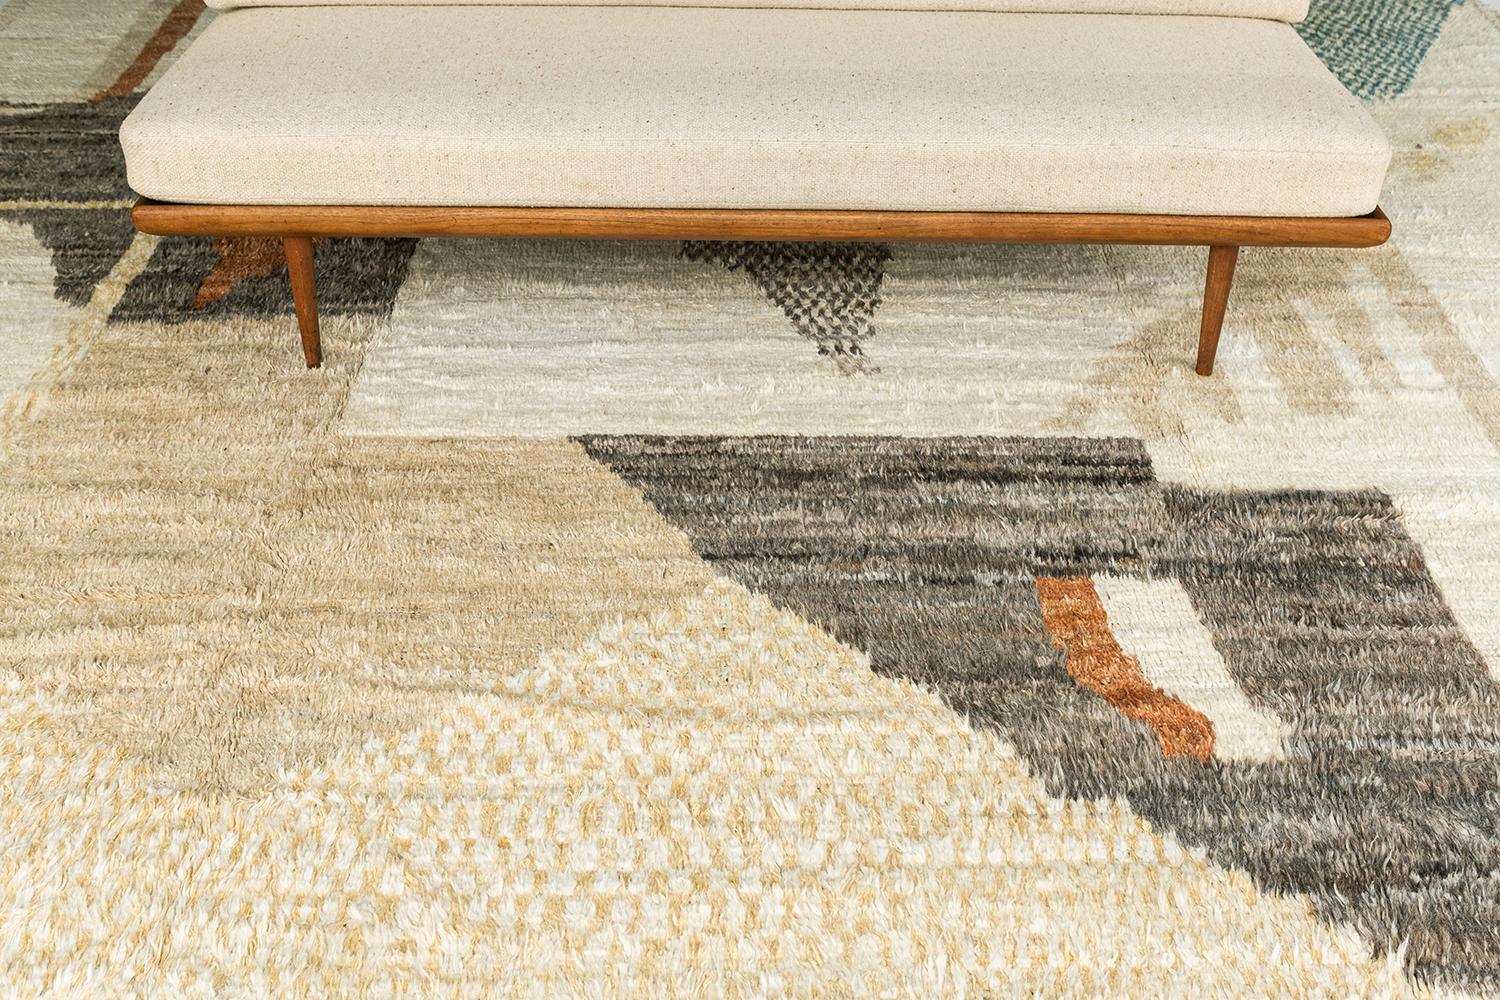 Kaouki' is made of luxurious wool and is made of timeless design elements. Its weaving of natural earth tones with vibrant colors and unique design patterns and shapes is what makes the Atlas Collection so unique and sought after. Mehraban's Atlas